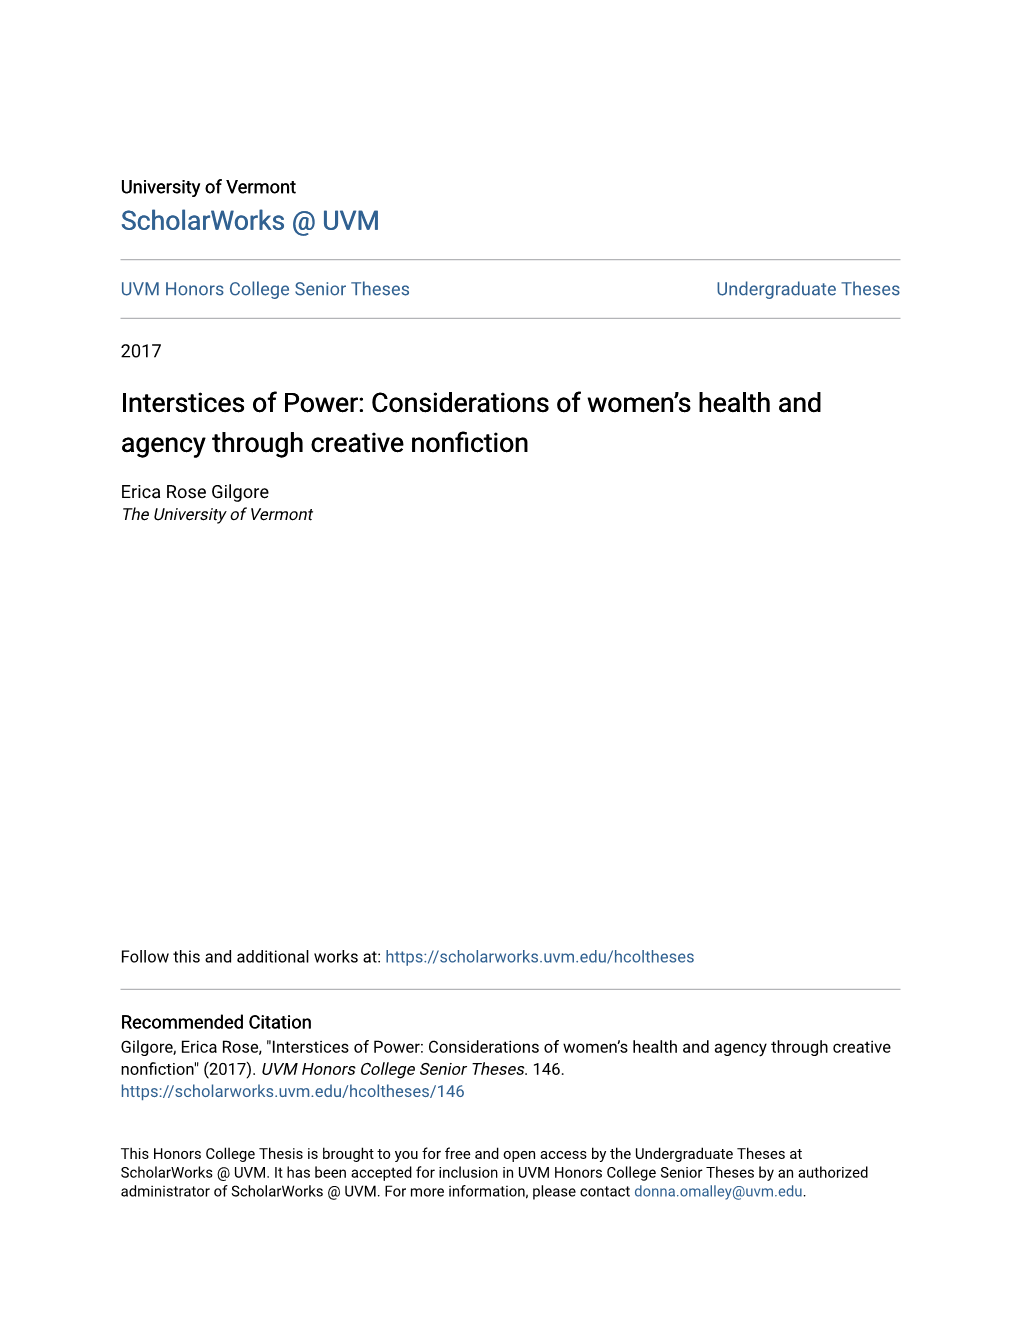 Considerations of Women's Health and Agency Through Creative Nonfiction